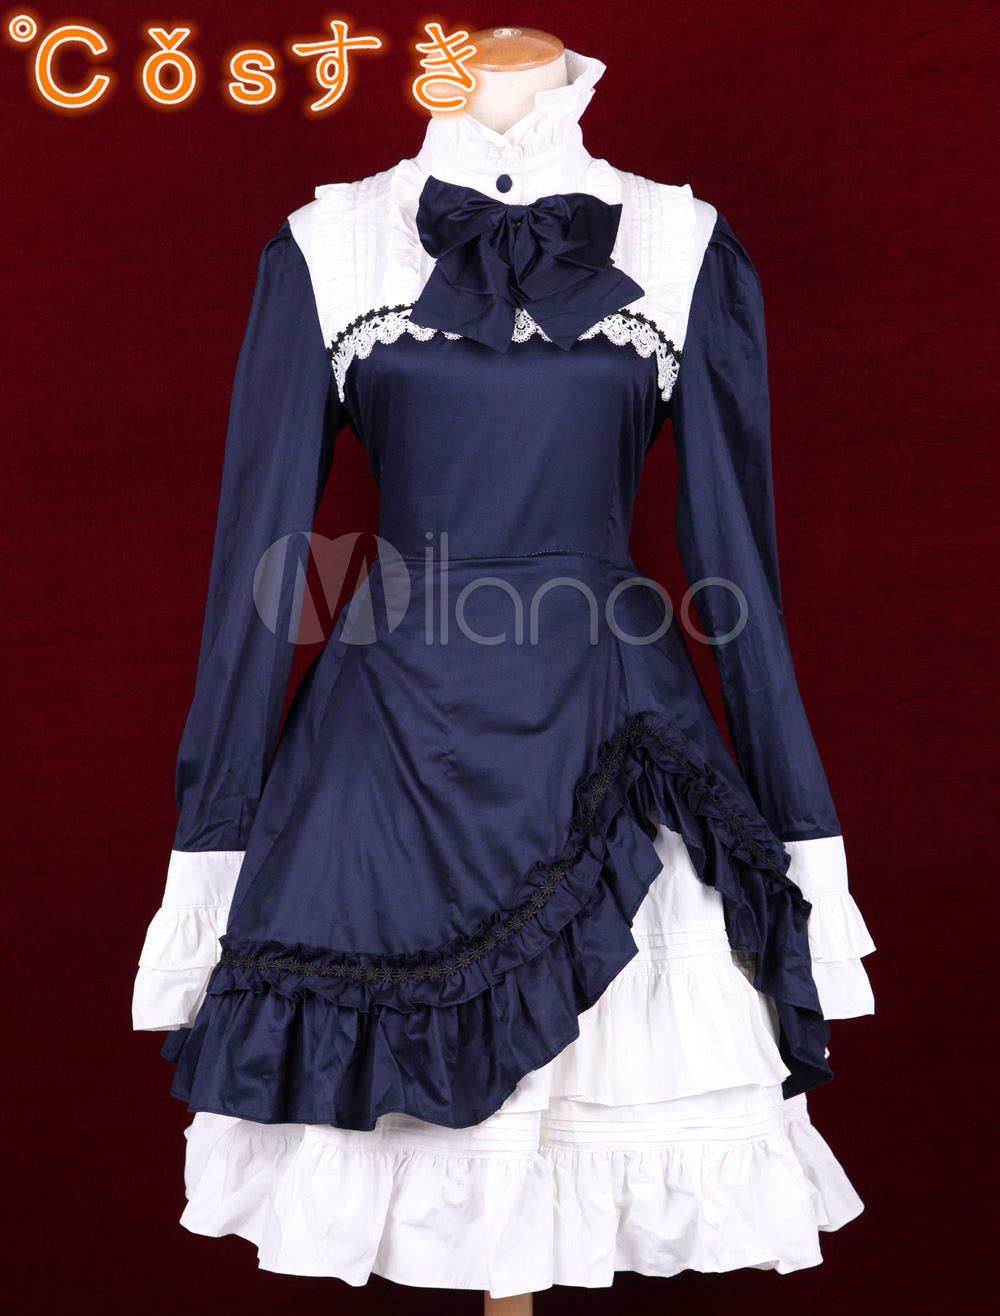 Free shipping! Newest! High - quality! White Navy Blue Cotton Stand Collar Long Sleeves Classic Lolita Dress